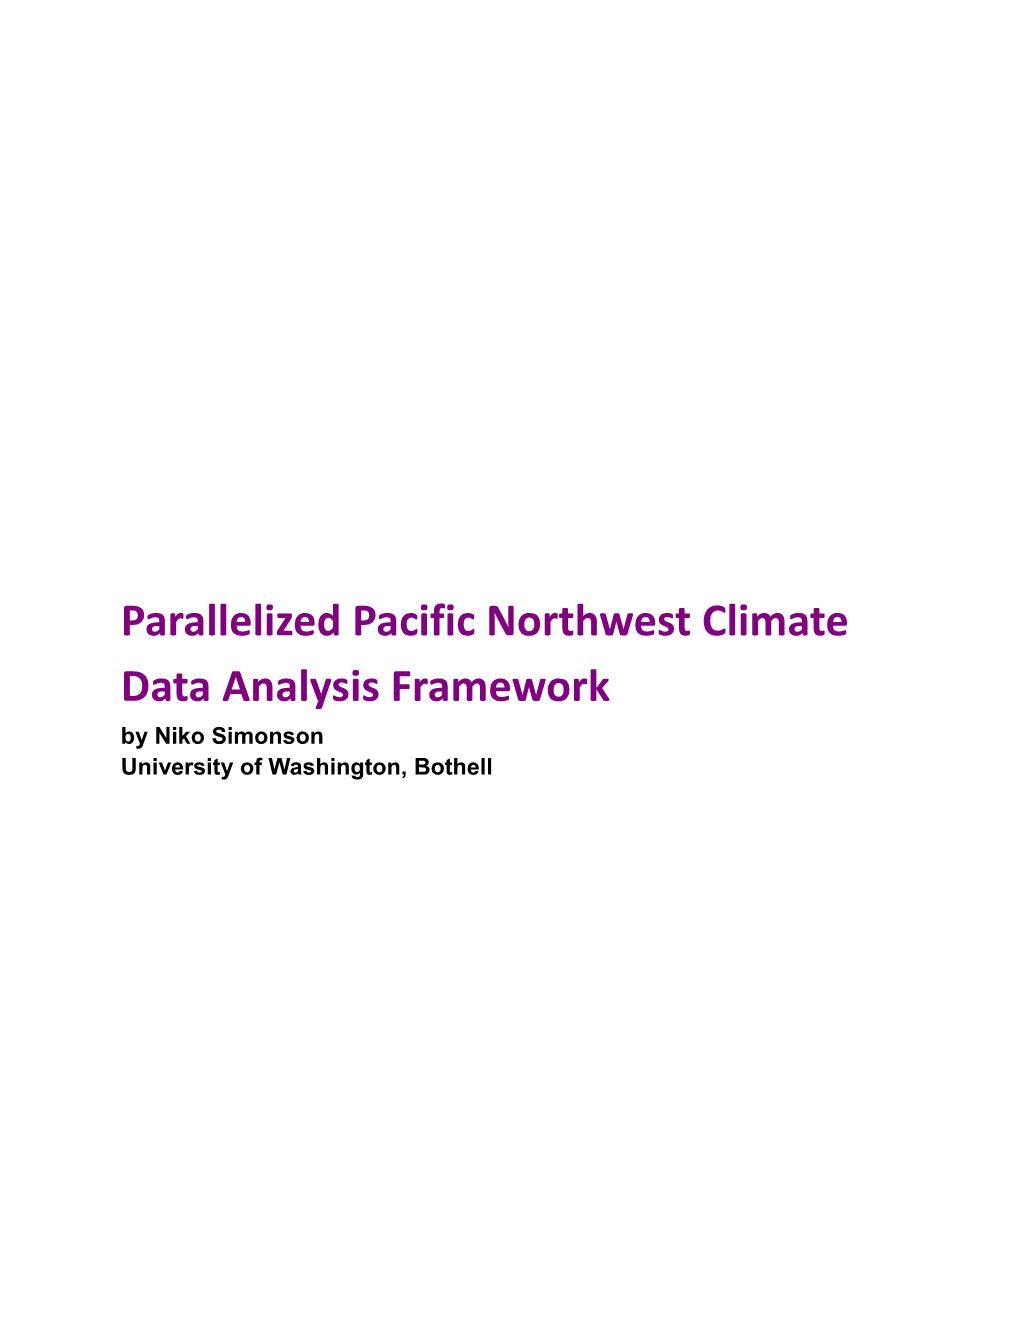 Parallelized Pacific Northwest Climate Data Analysis Framework